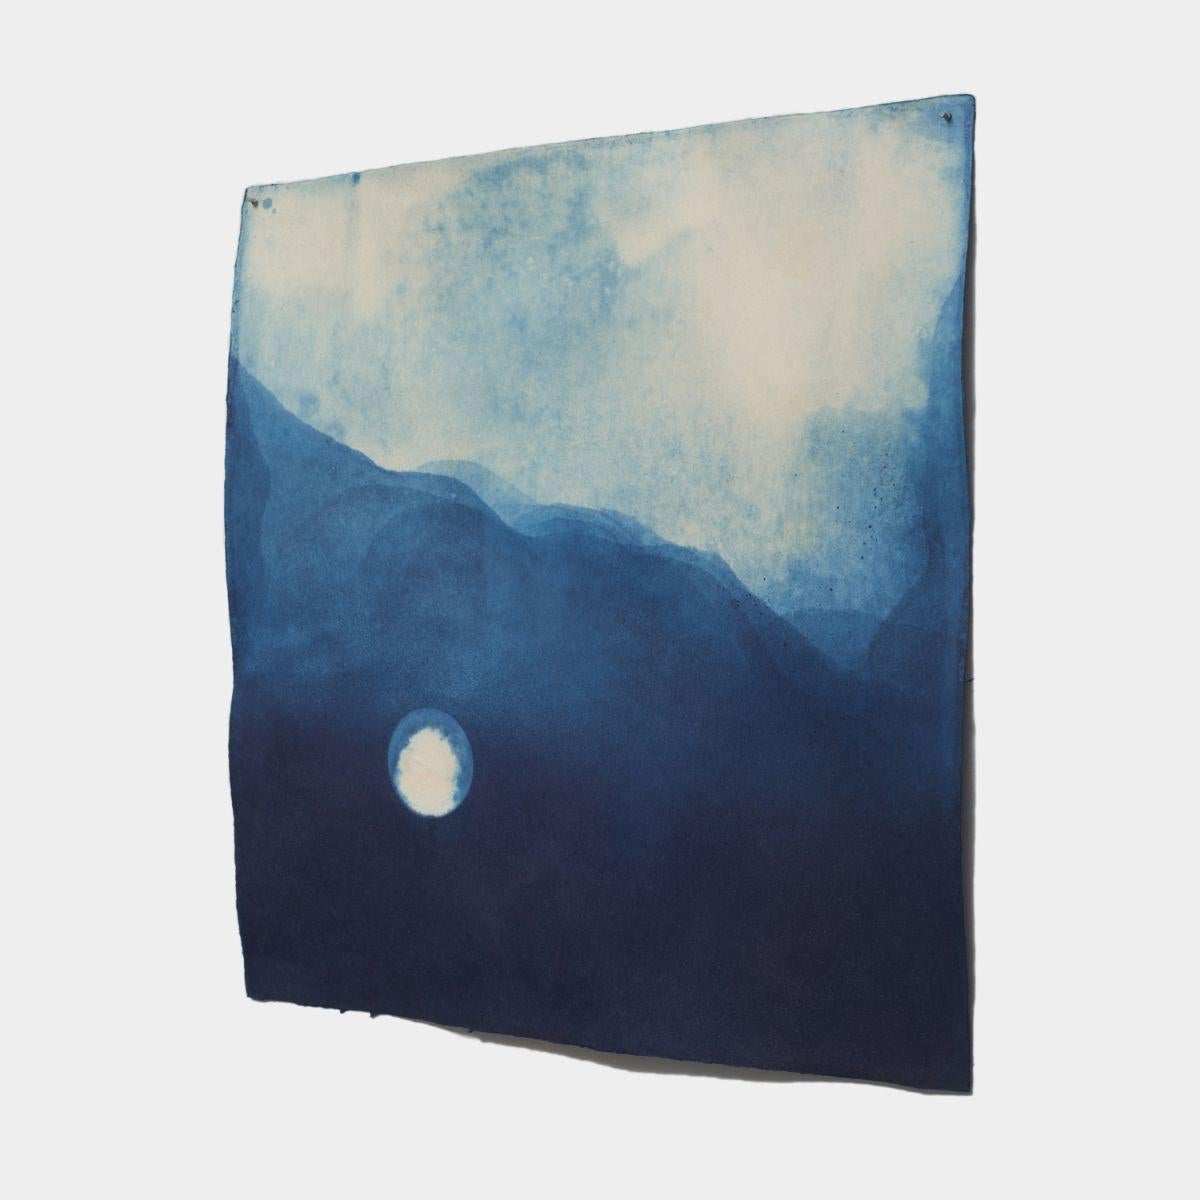 Natural indigo and pure silver on paper, painting of the moon over the mountains - Abstract Painting by Miya Ando